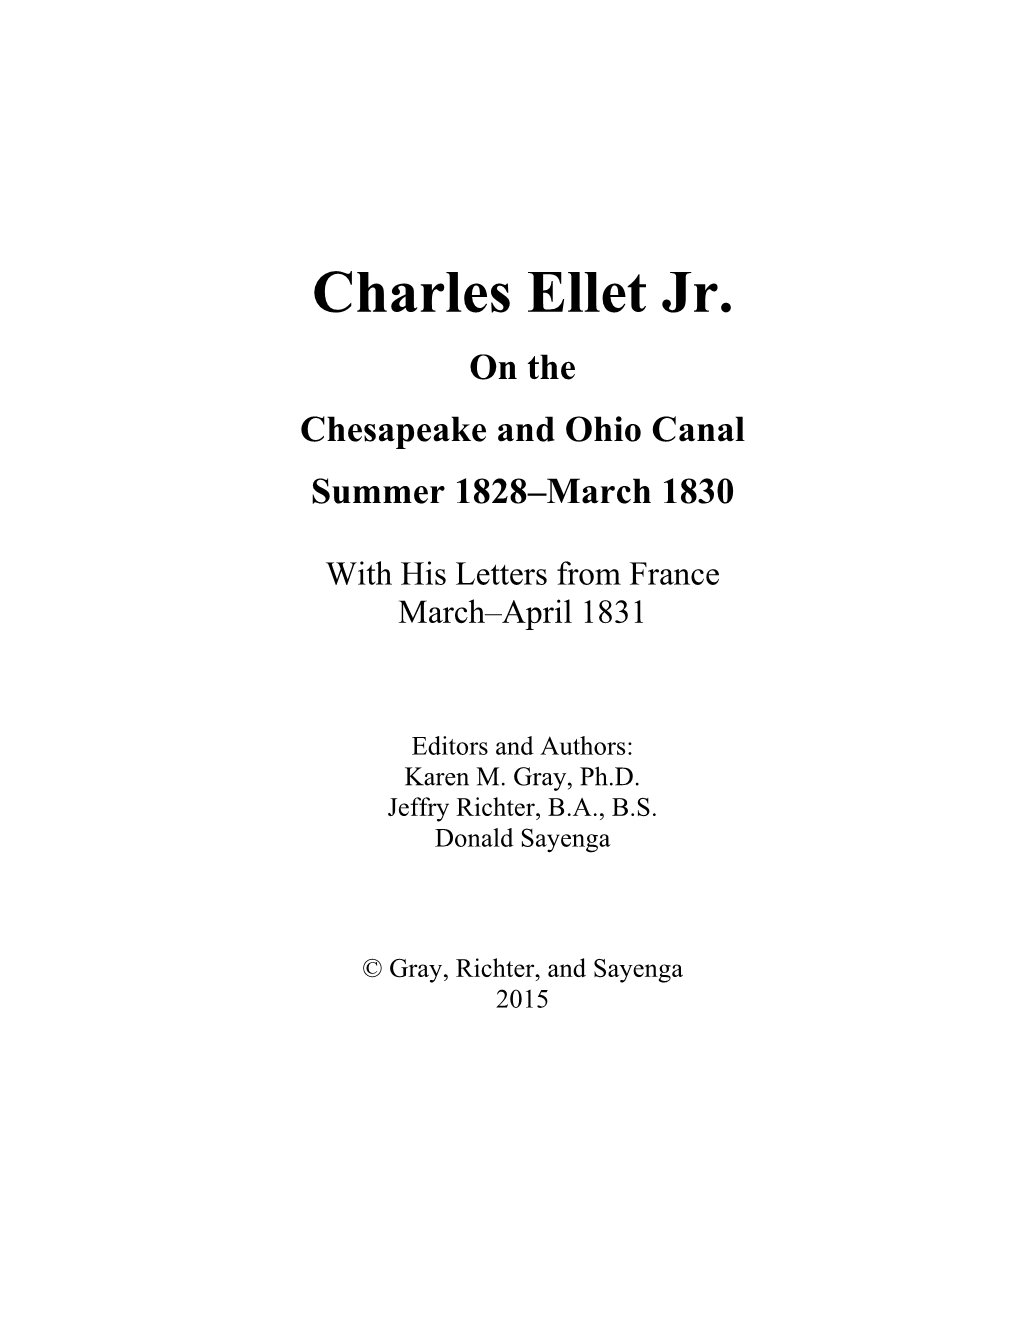 Charles Ellet Jr. on the Chesapeake and Ohio Canal Summer 1828–March 1830